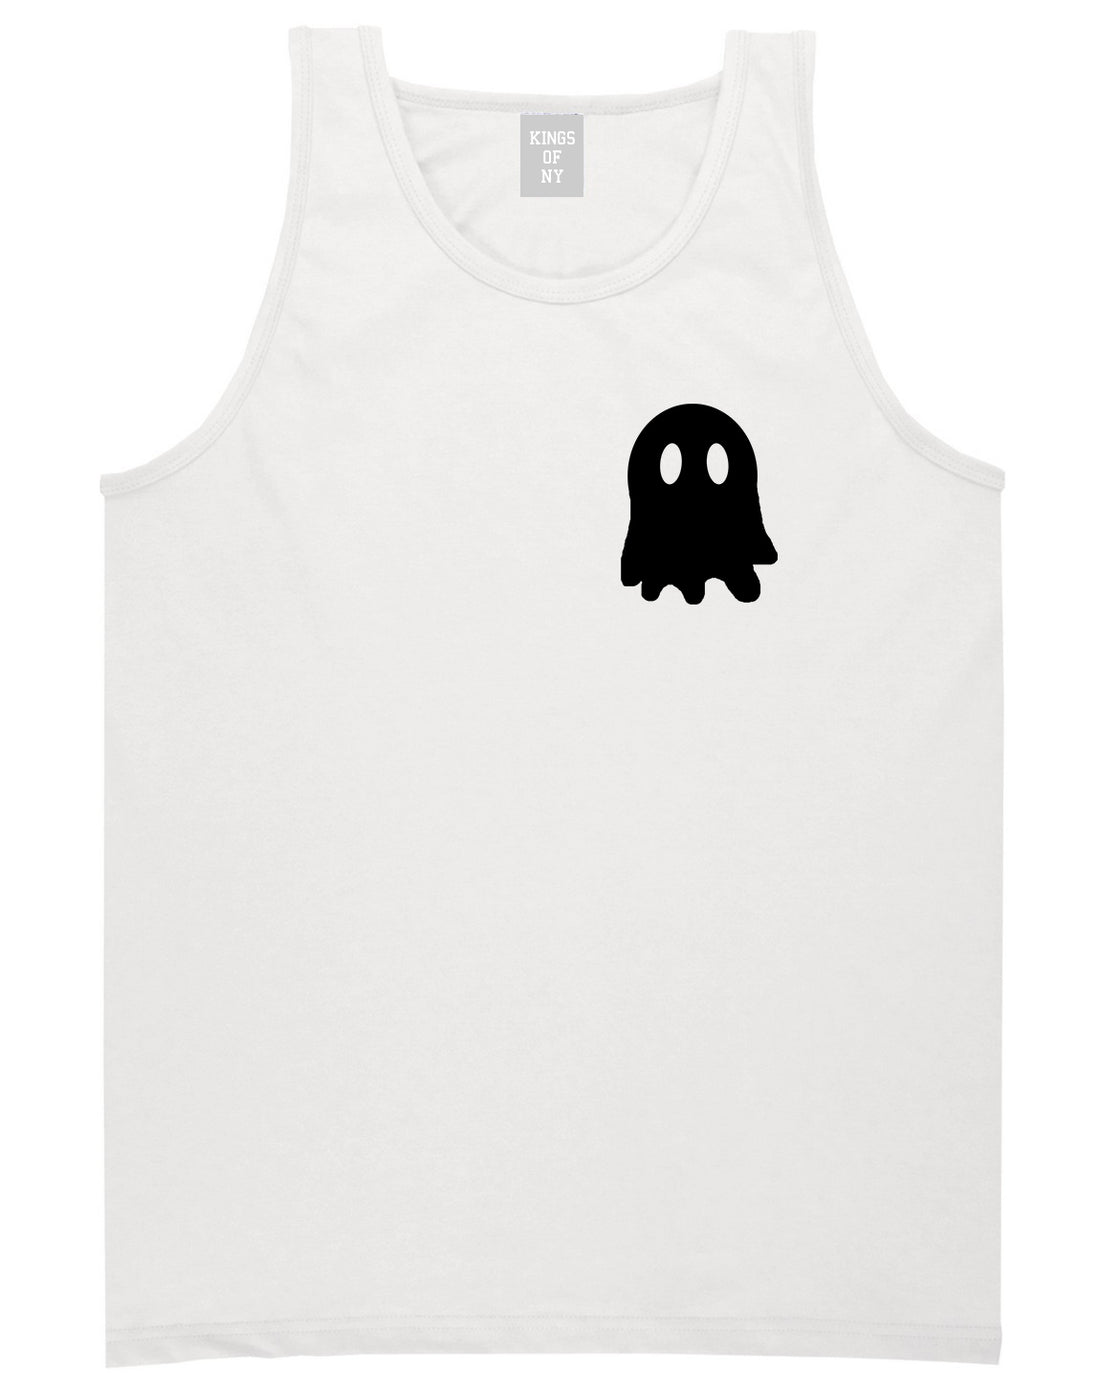 Ghost Chest Mens White Tank Top Shirt by KINGS OF NY